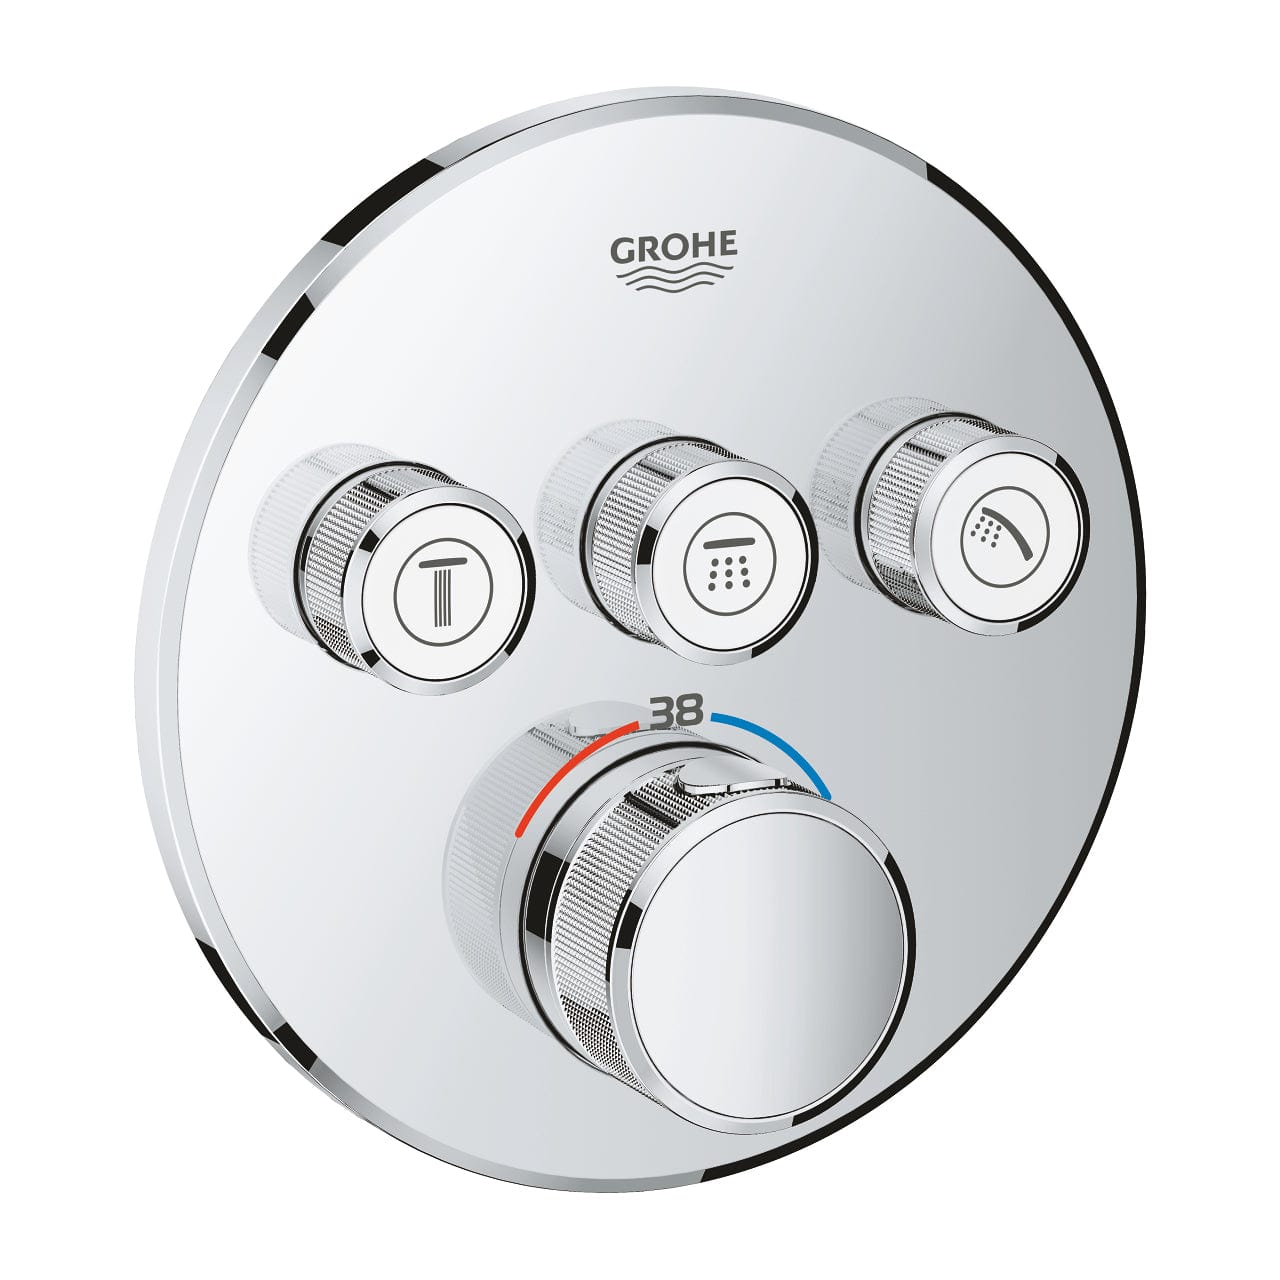 Grohe Grohtherm Smartcontrol Thermostat for Concealed Installation with 3 Valves - Round | Supply Master | Accra, Ghana Bathroom Faucet Buy Tools hardware Building materials